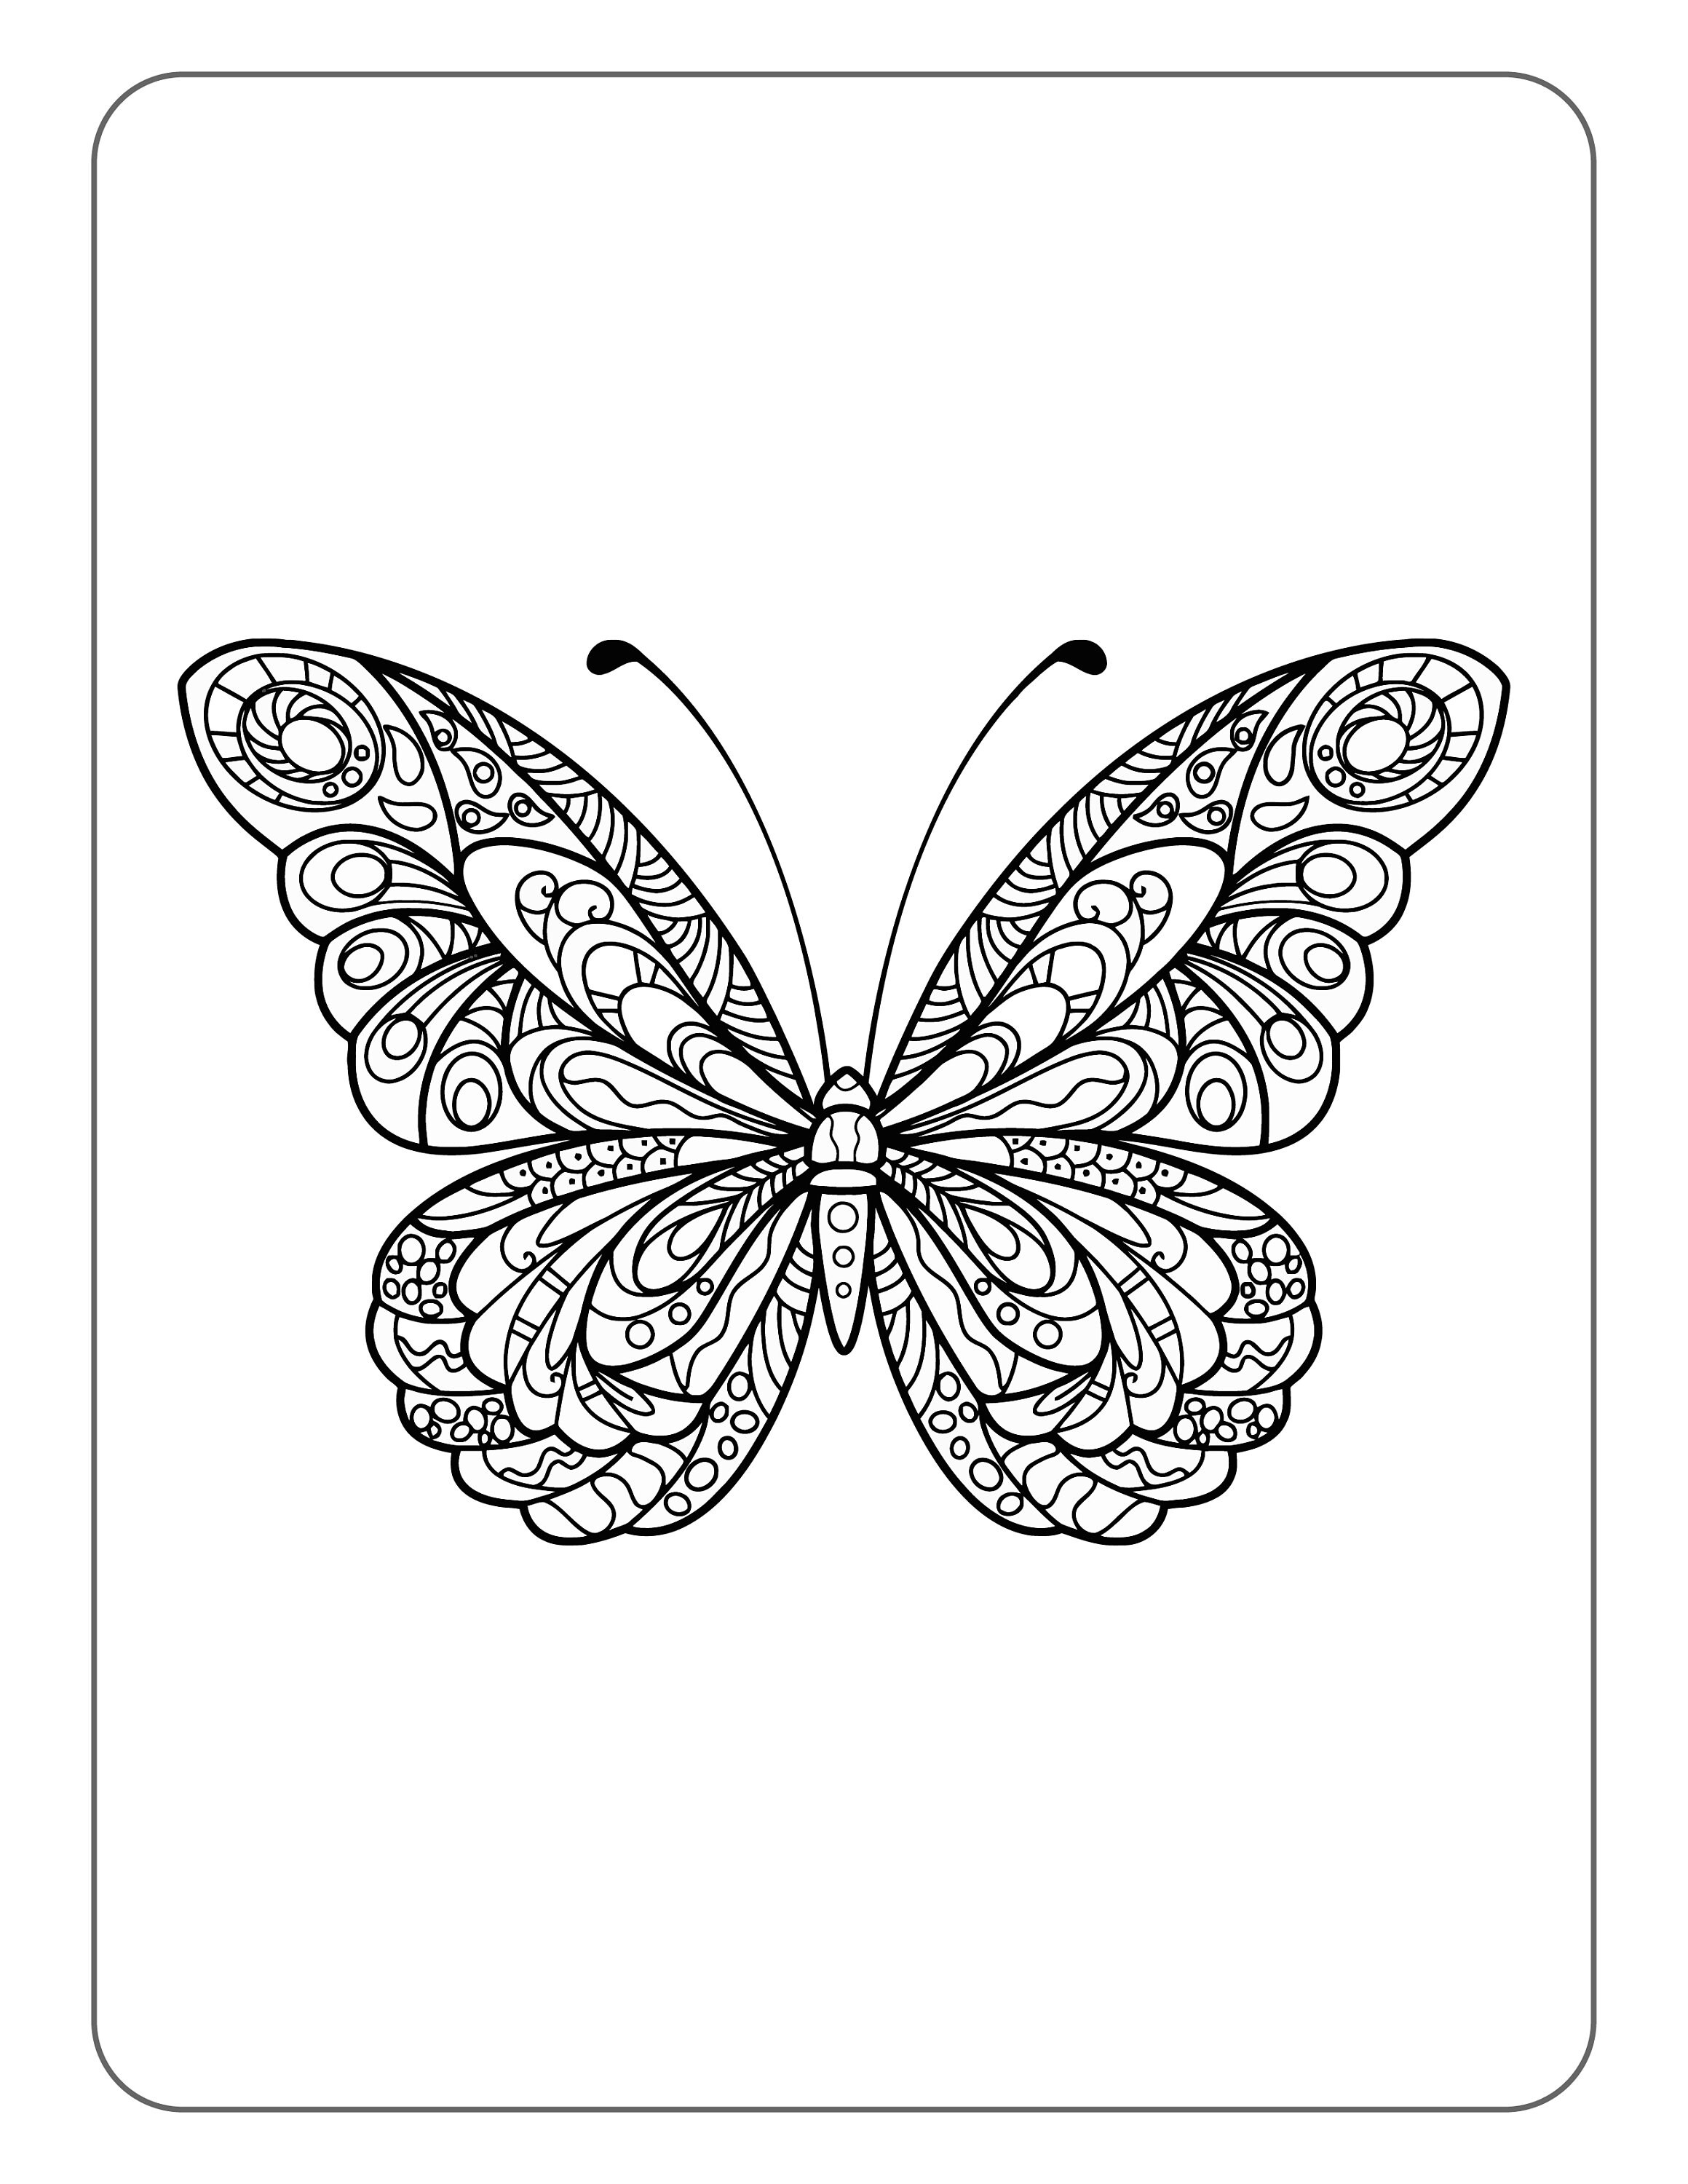 Printable Butterfly Coloring Pages for Adults - Etsy